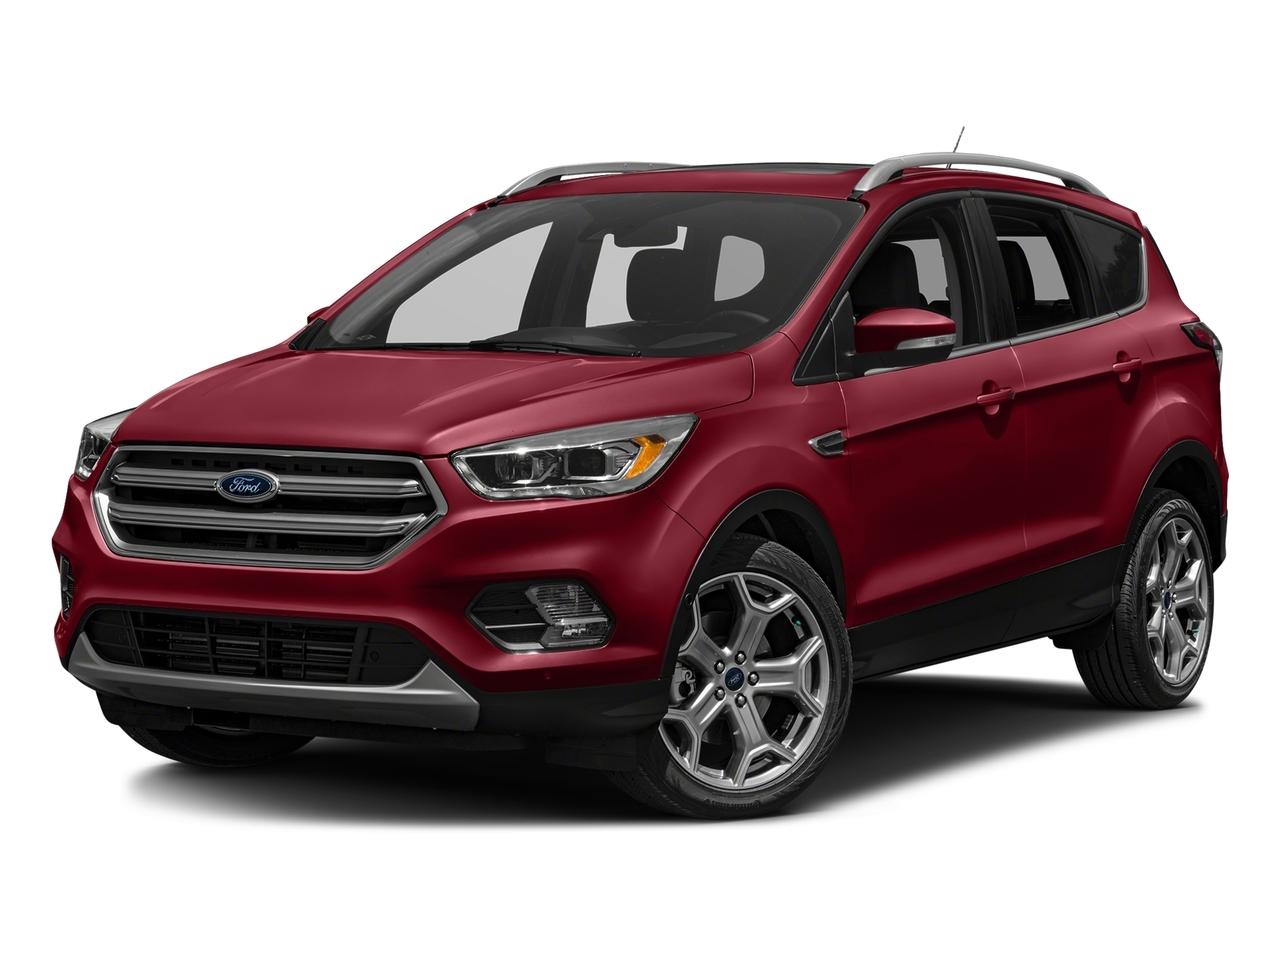 2017 Ford Escape Vehicle Photo in BETHLEHEM, PA 18017-9401